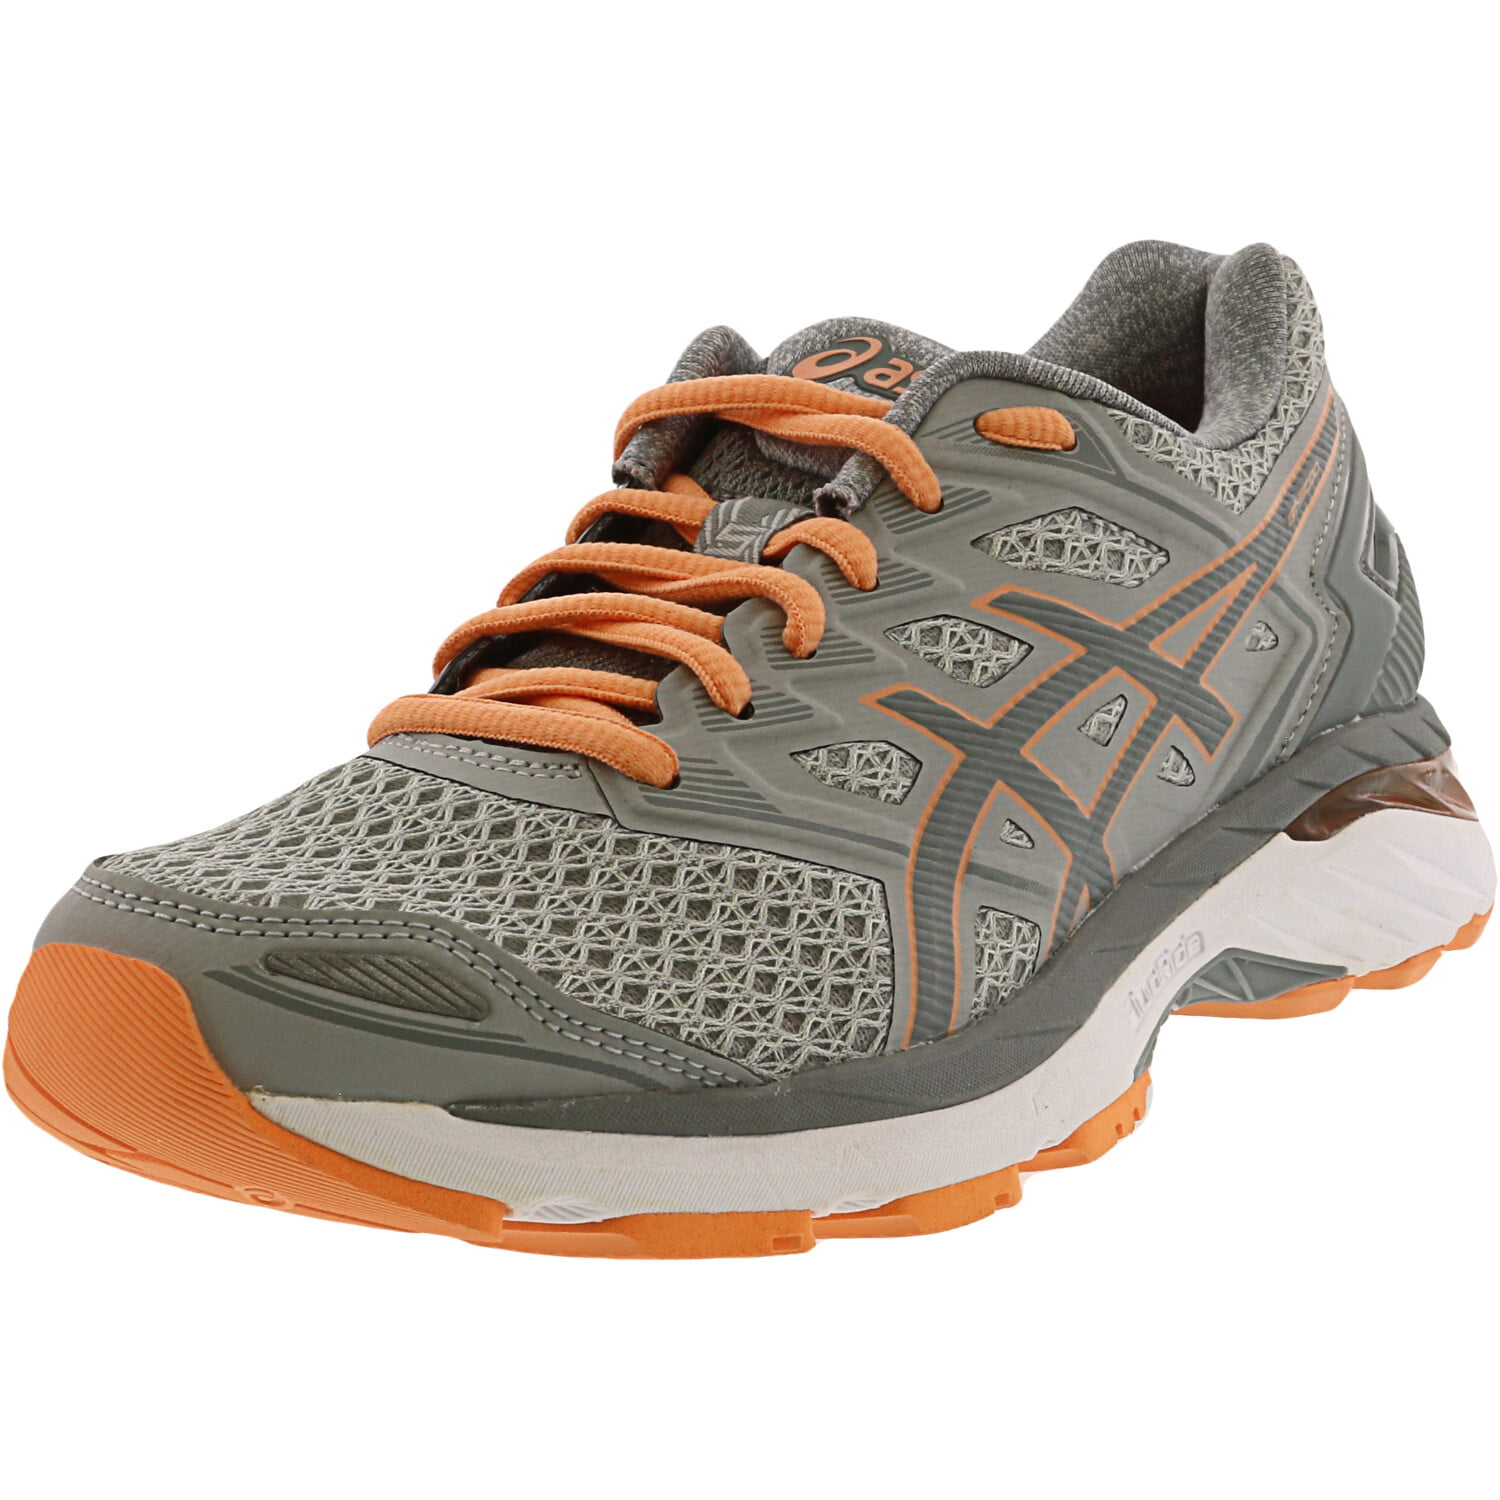 roekeloos Lionel Green Street amusement Asics Women's Gt-3000 5 Mid Grey / Stone Canteloupe Ankle-High Running - 6M  - Walmart.com